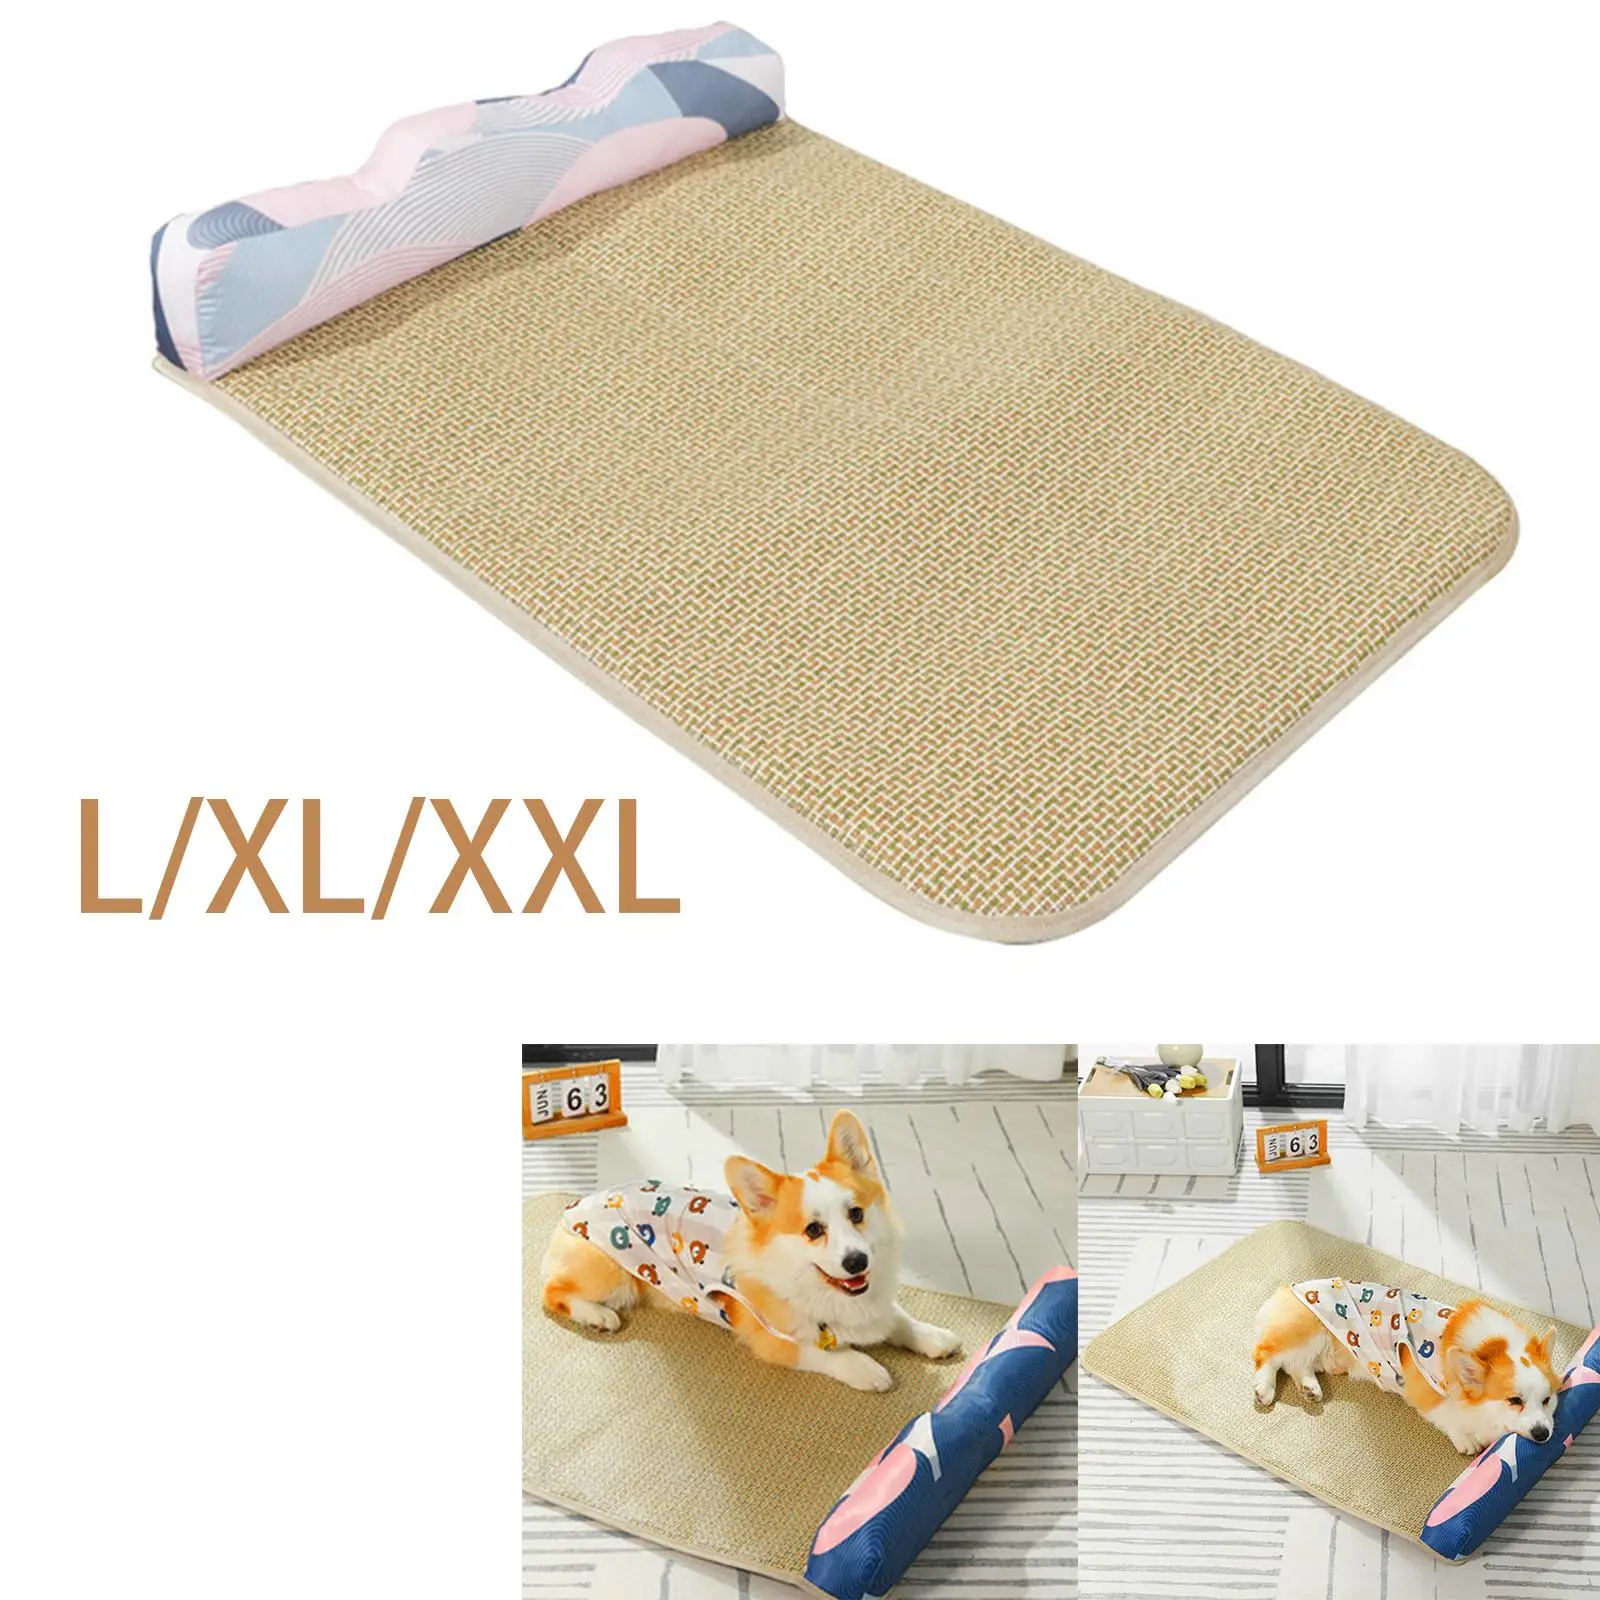 Pet Cooling bed Cooling Mat Self blanket breathable Sleeping Pad for Dogs for summer Couches Floors